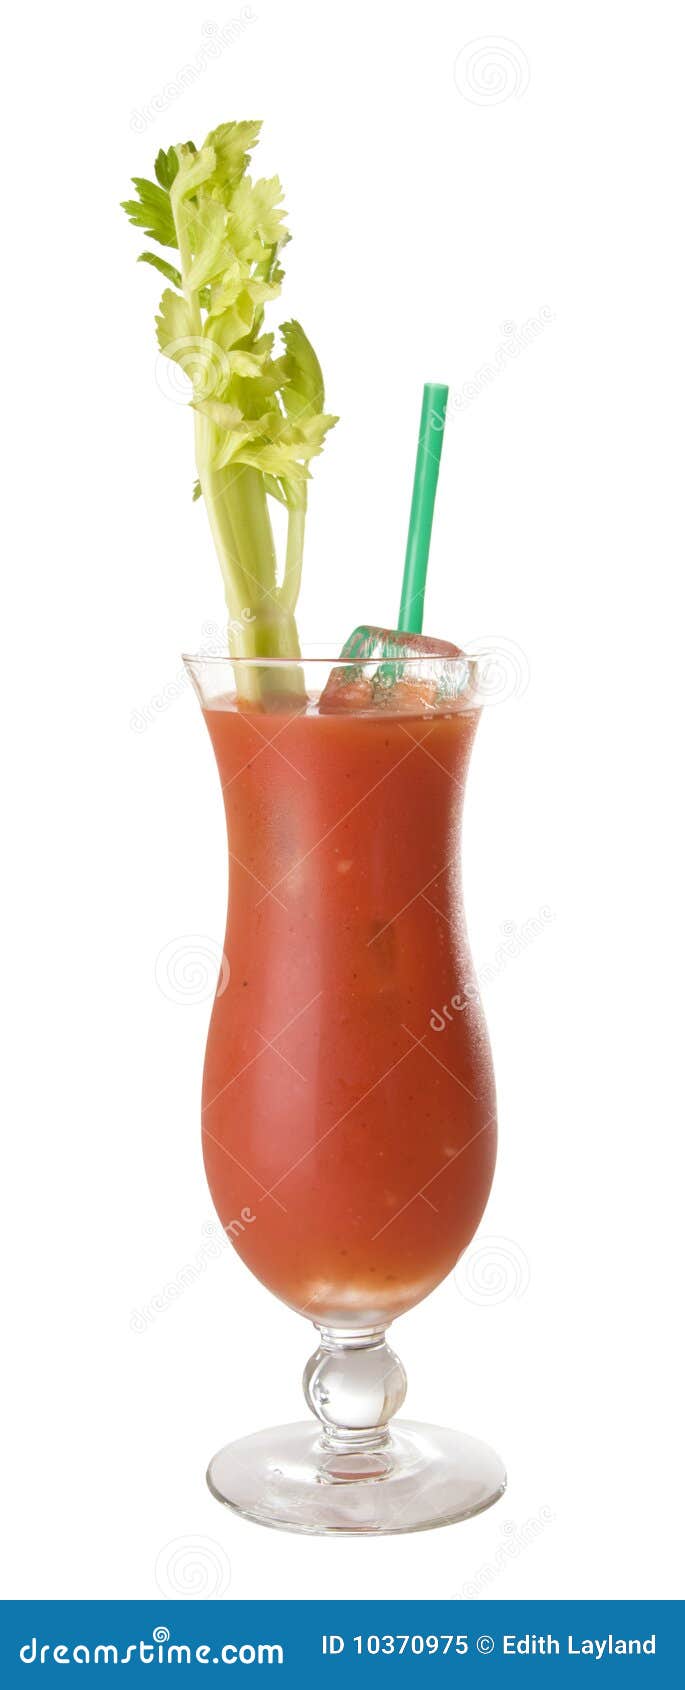 bloody mary clipart - photo #44